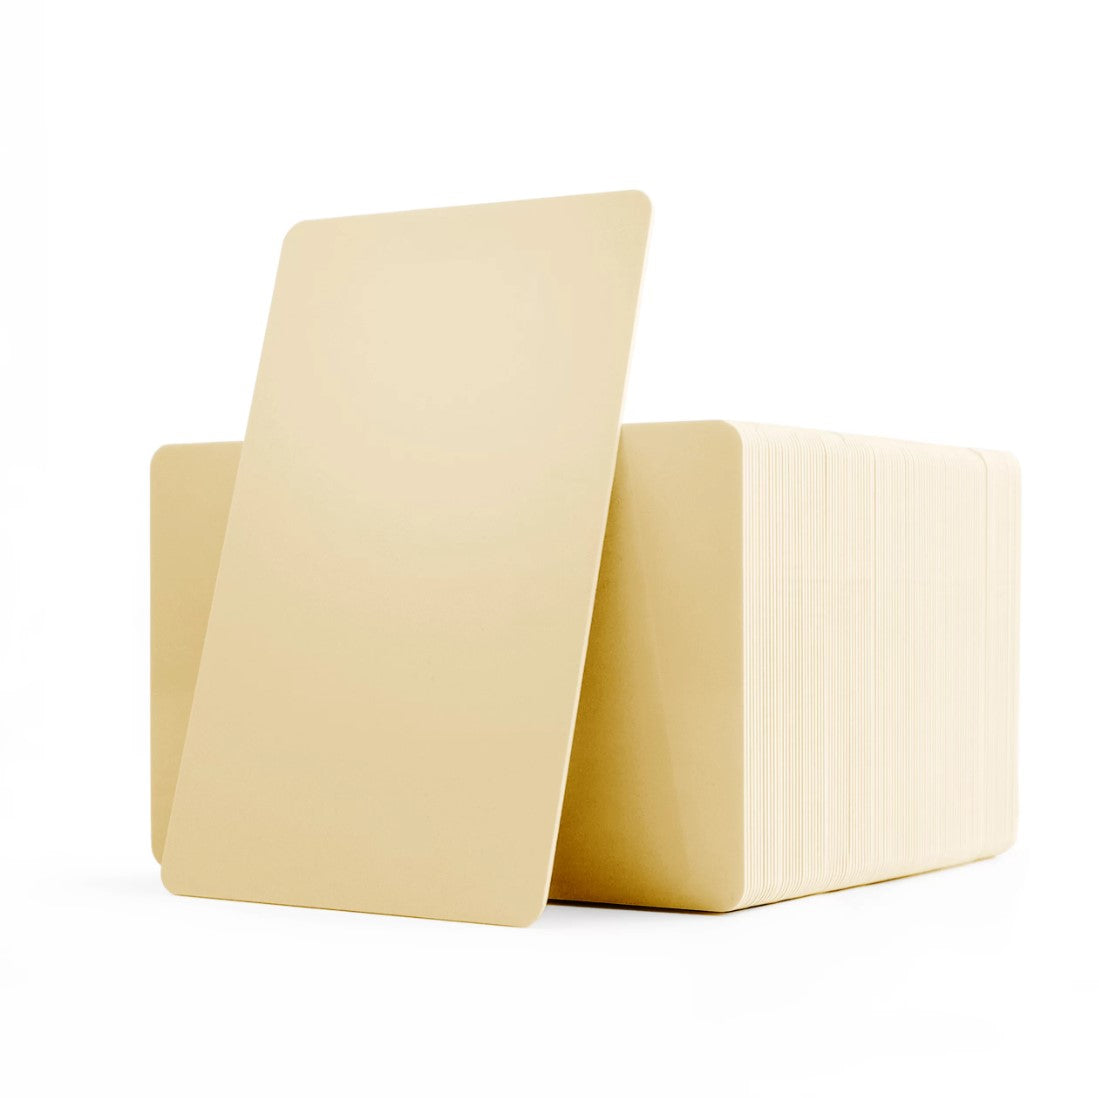 PVC CR80 Cream Coloured Cards With Solid Core Coloured Edges - 1 - 100